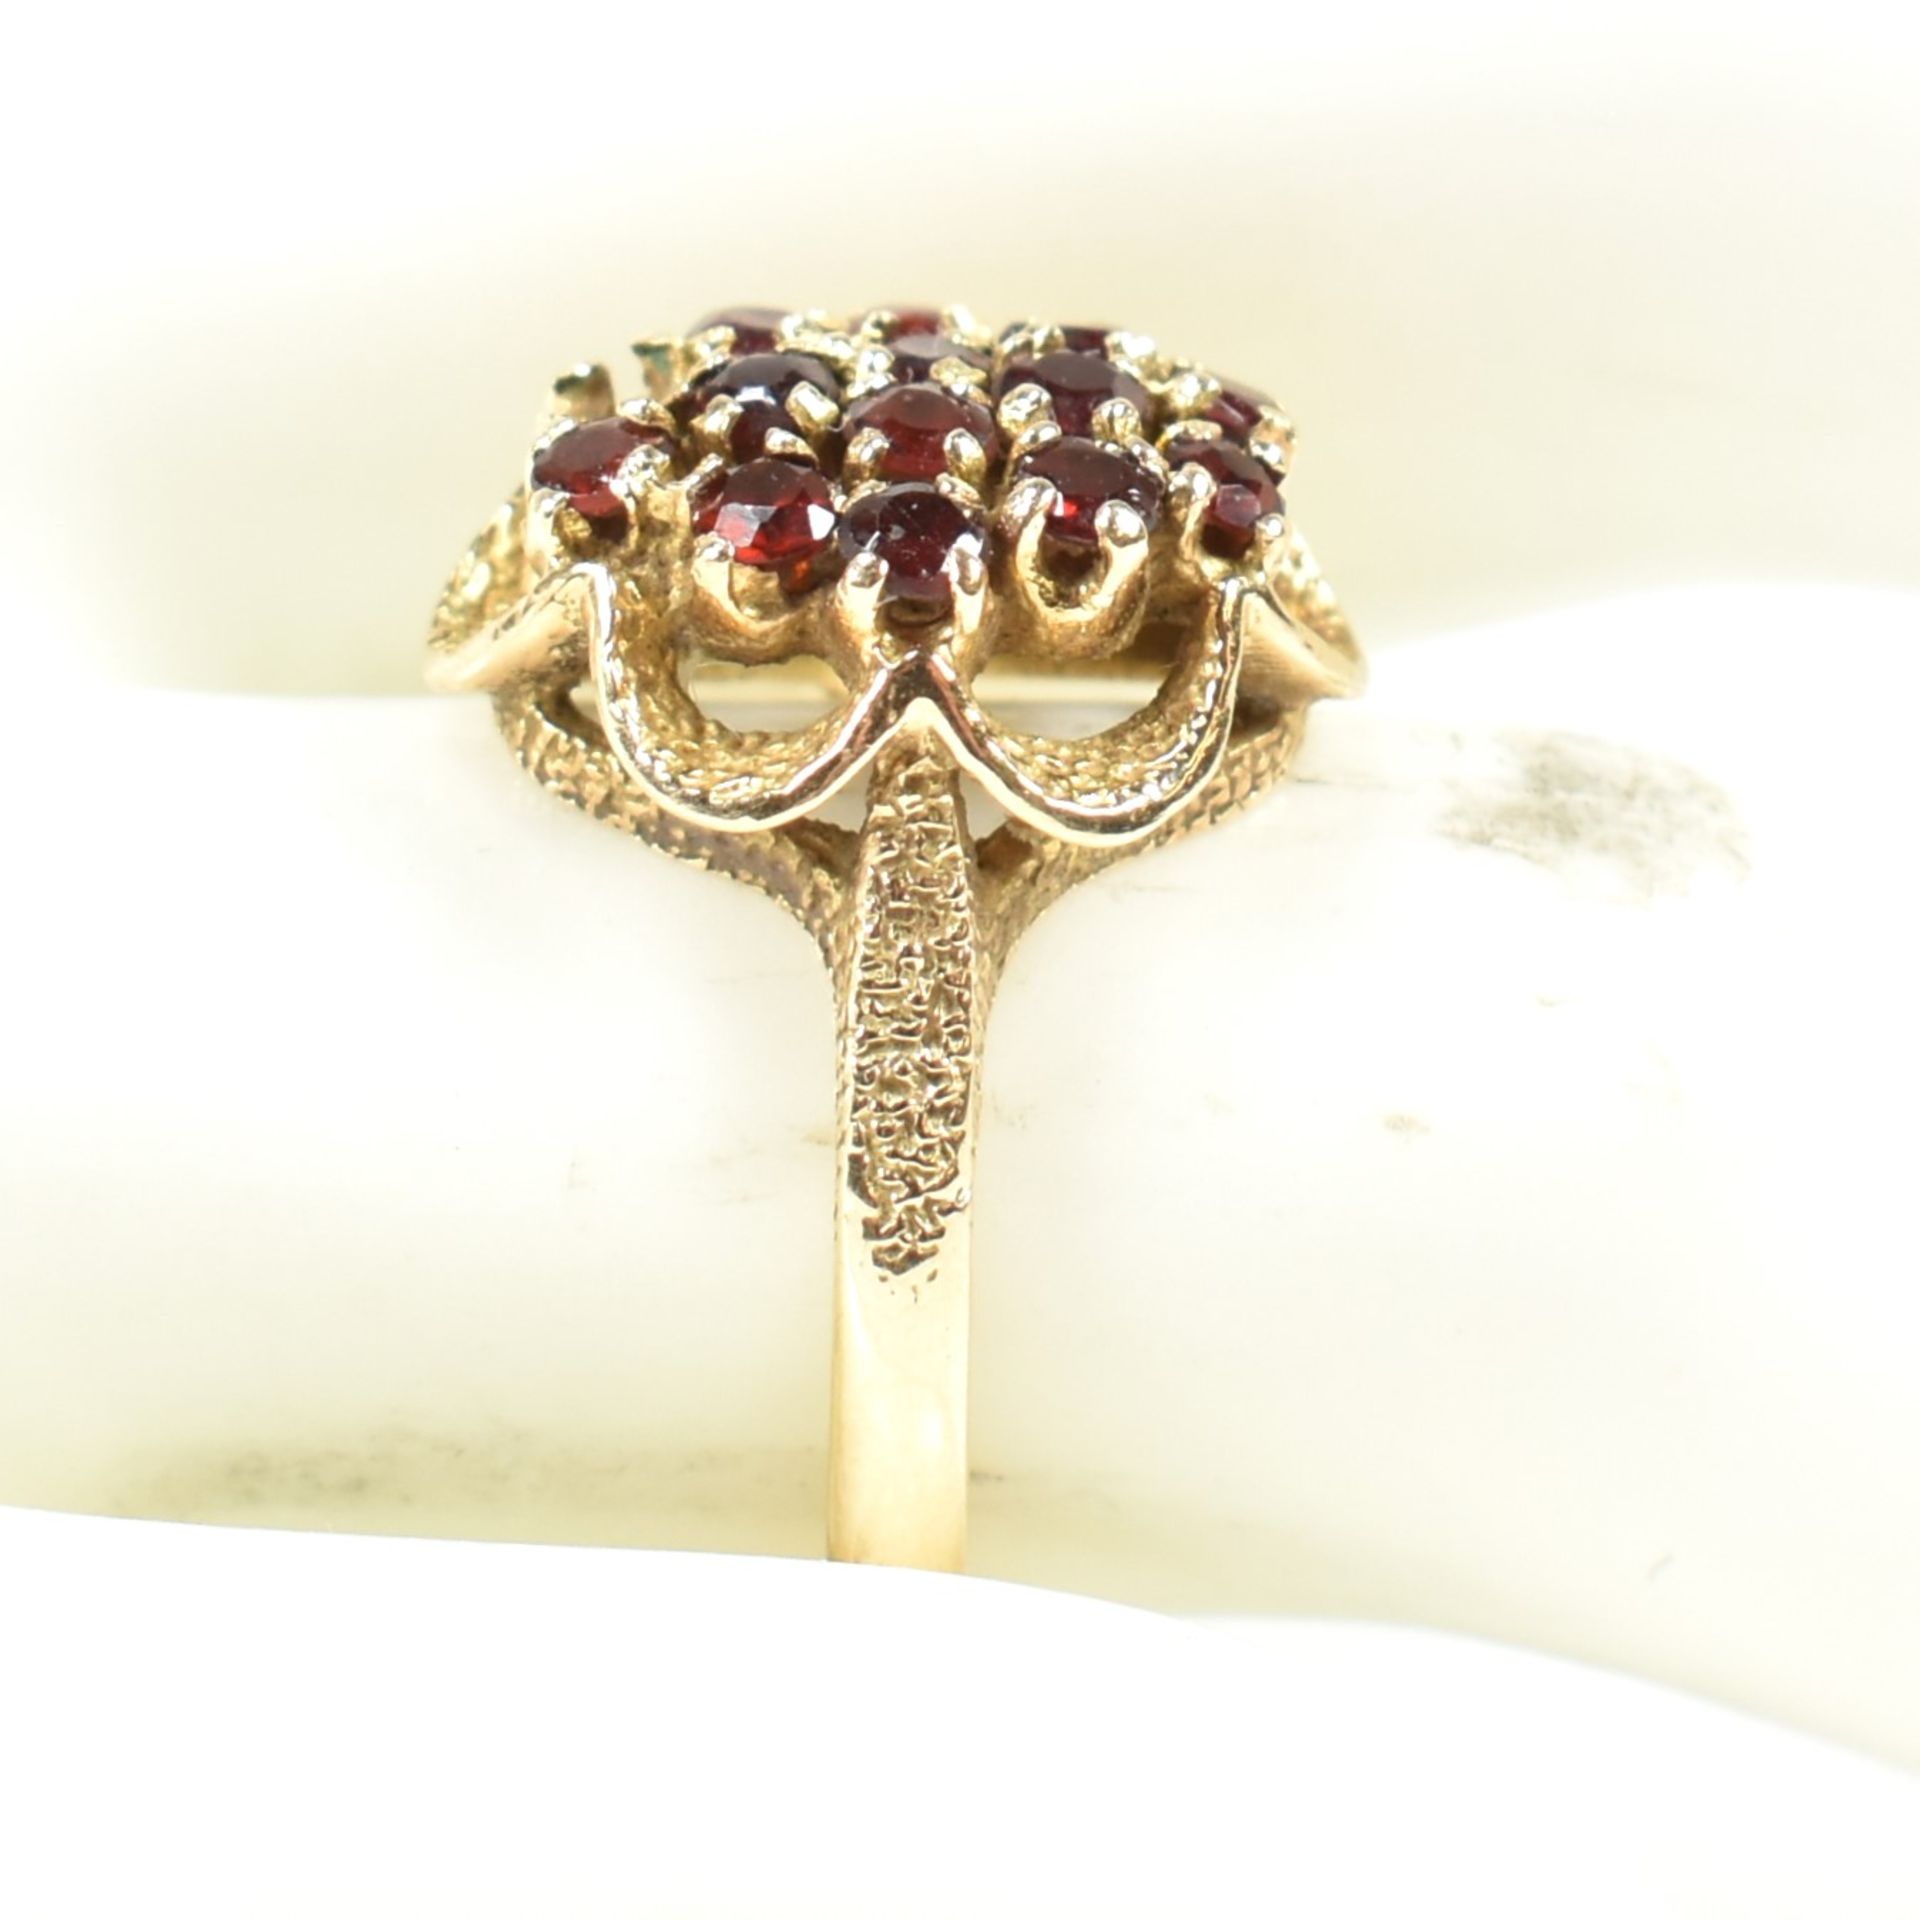 HALLMARKED 9CT GOLD CLUSTER RING - Image 10 of 10